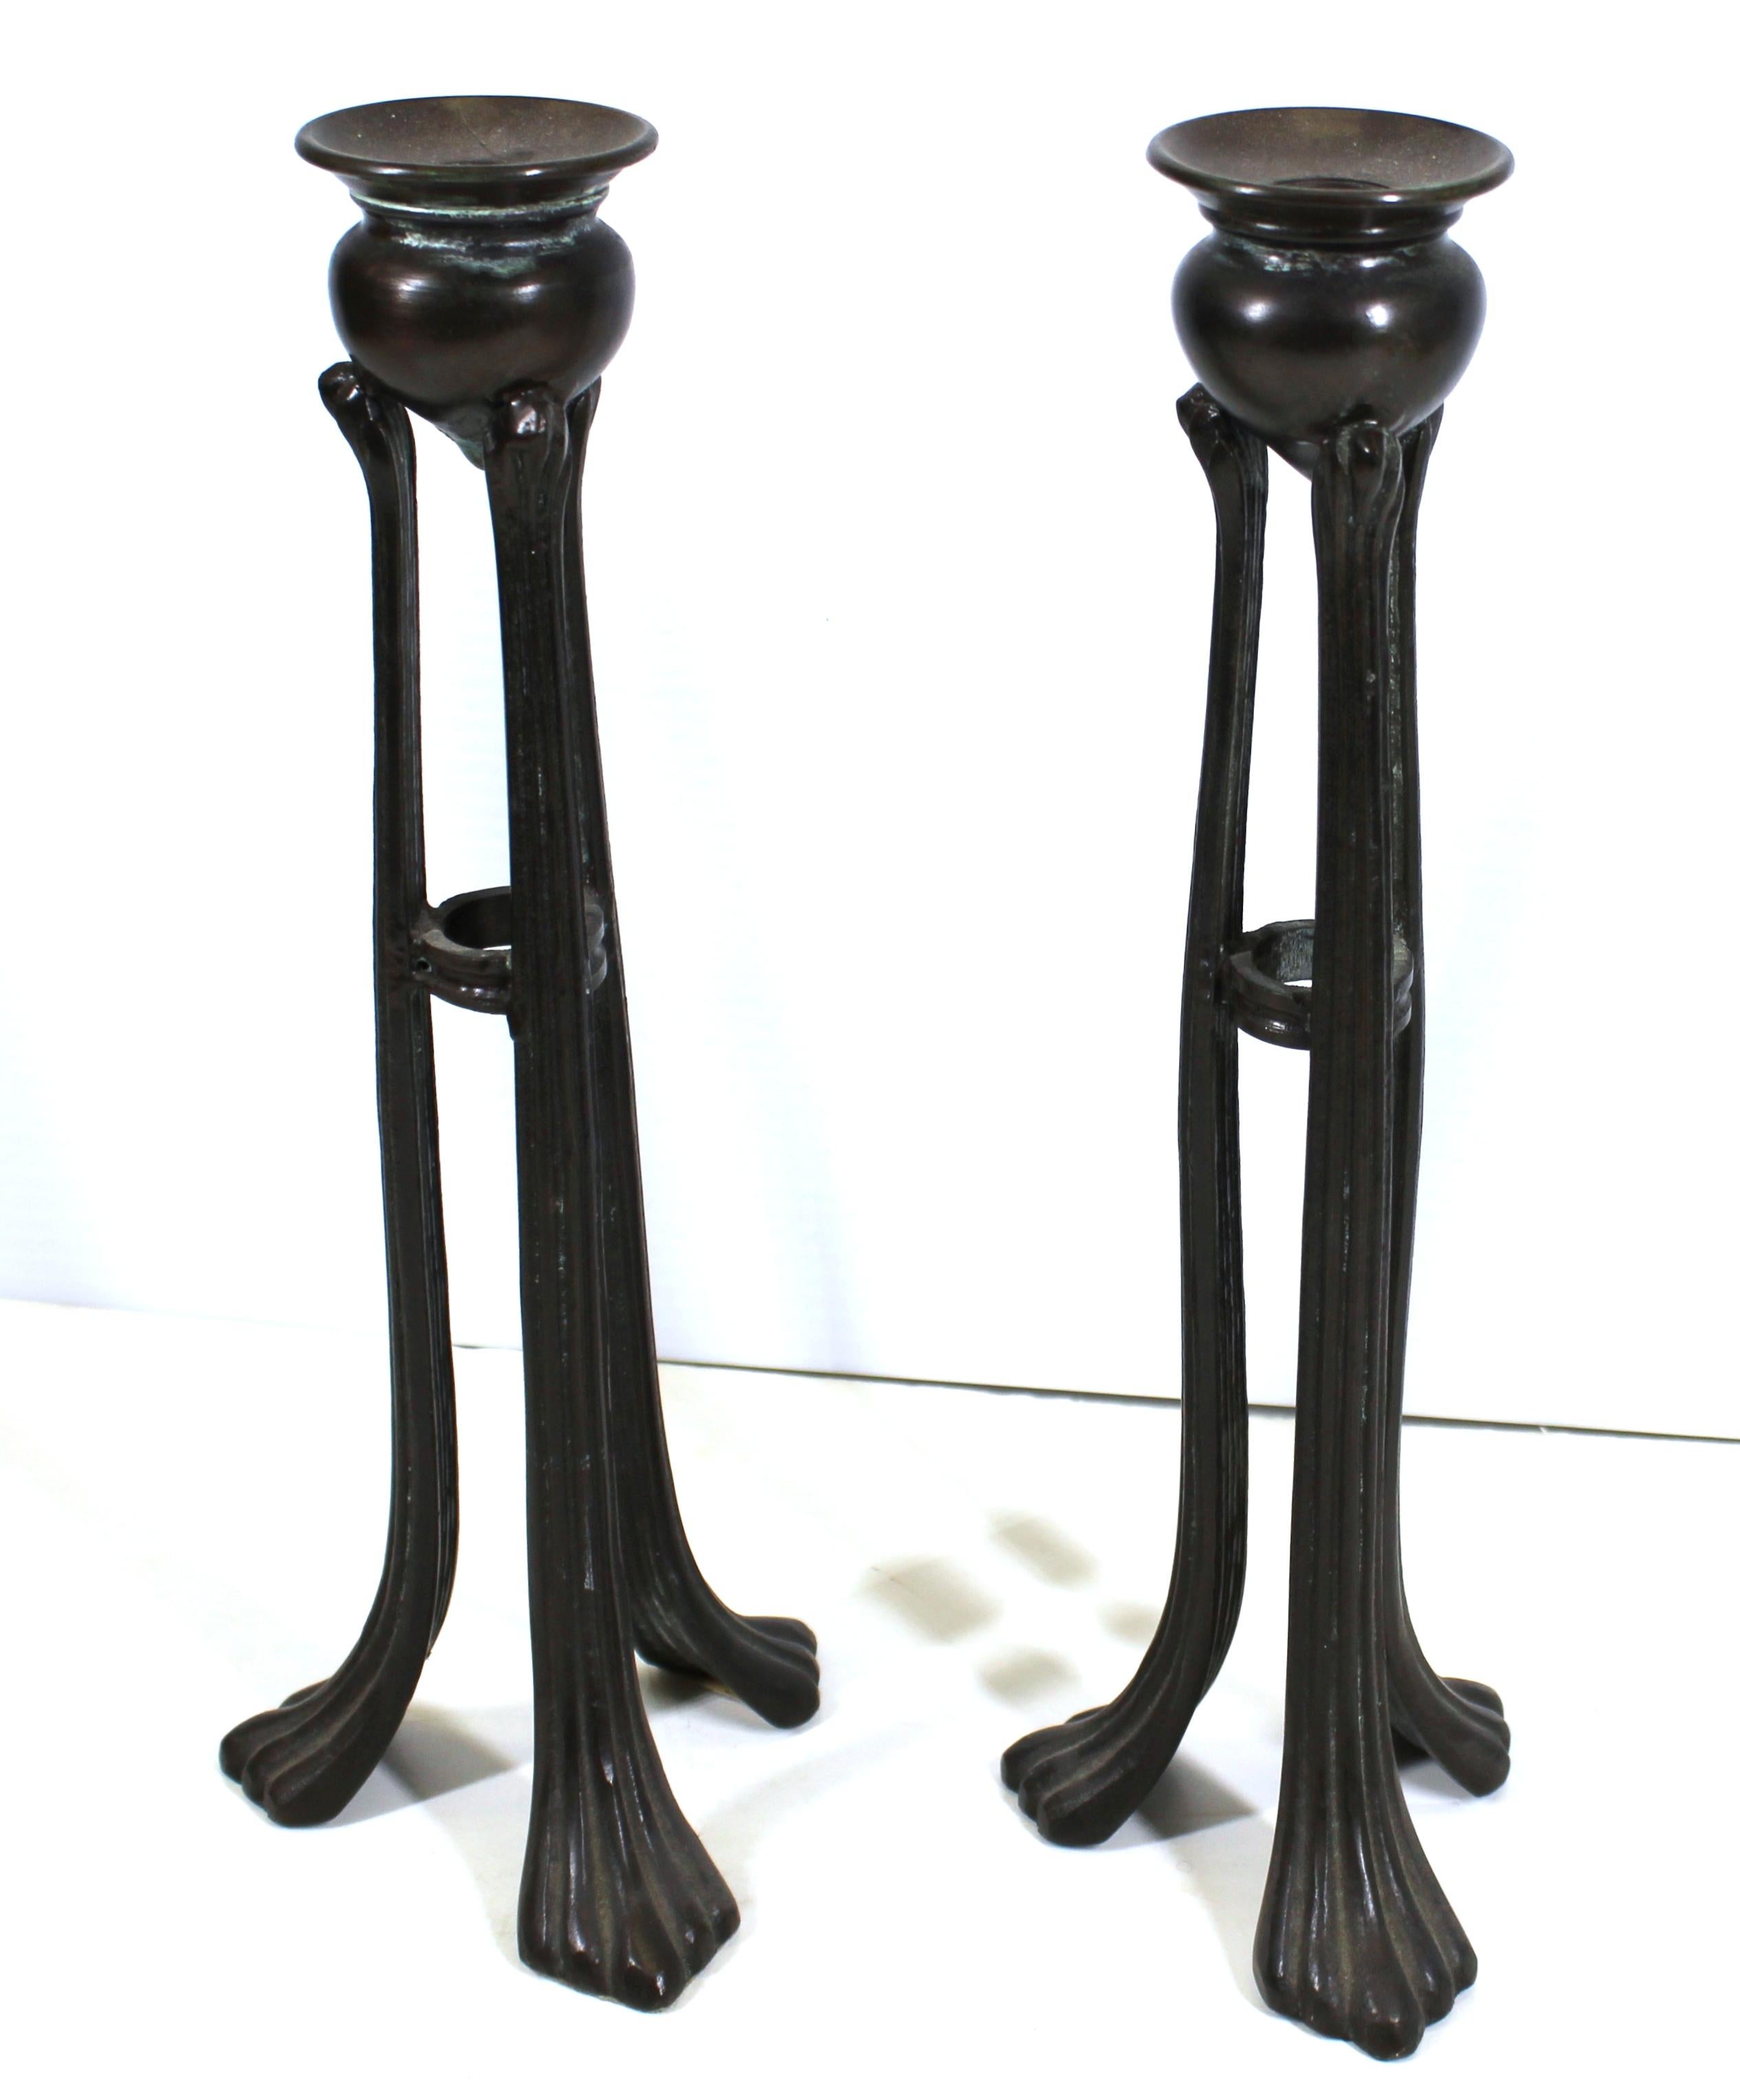 Tiffany style or Aesthetic movement tripod urn-form bronze candlesticks. Measures: 12.5